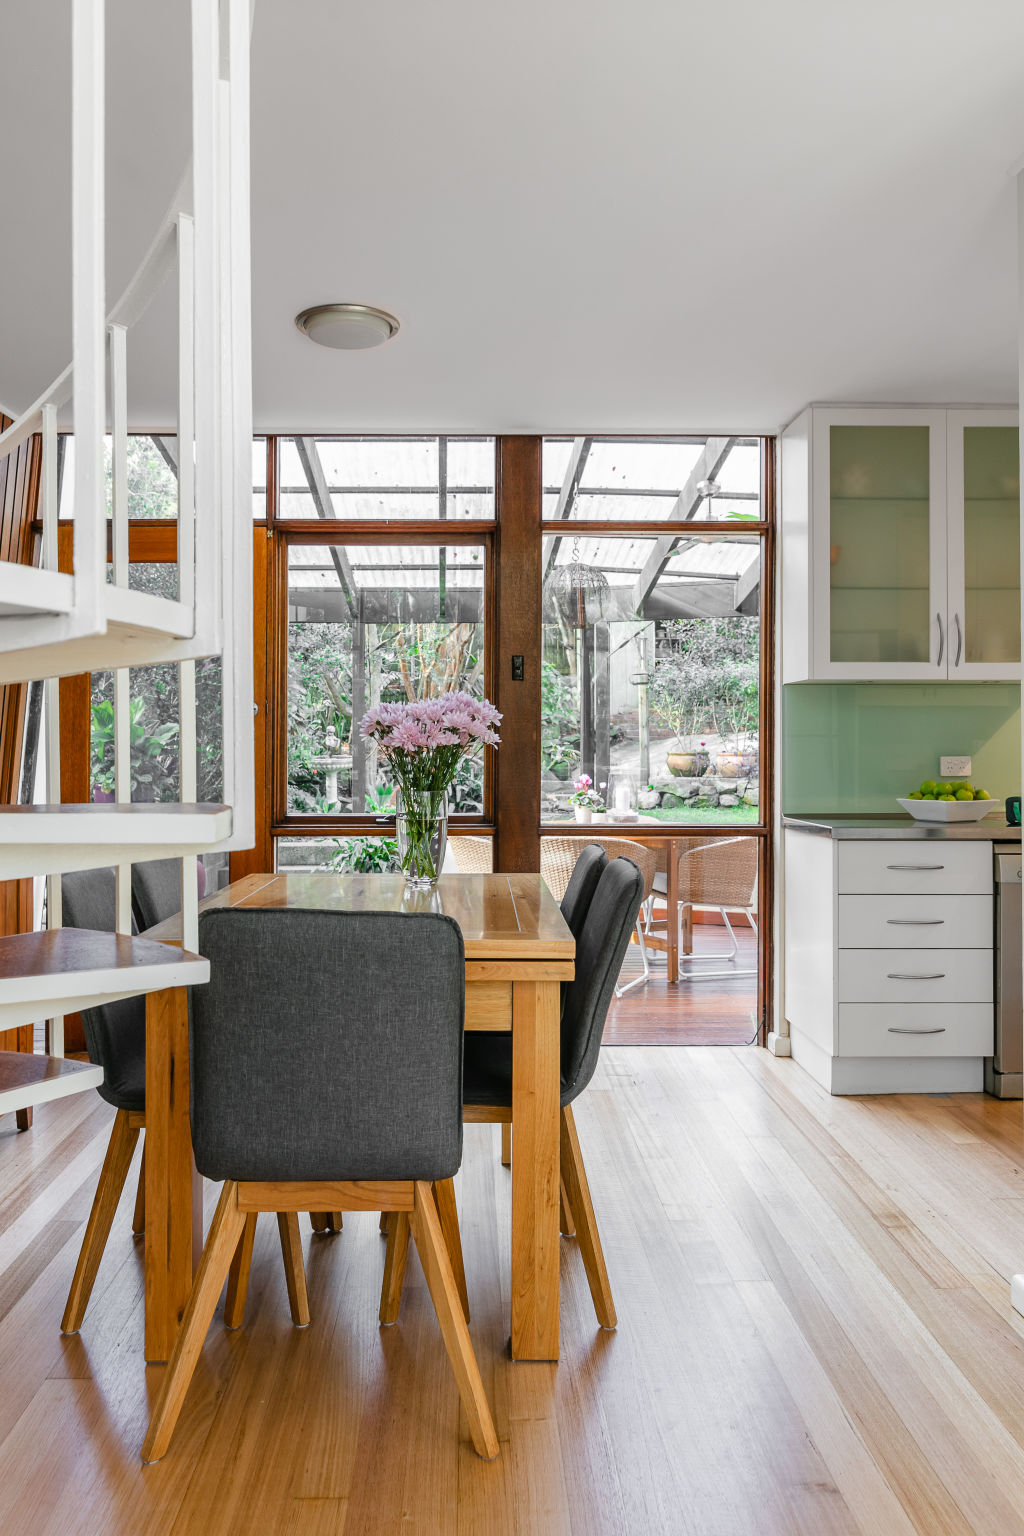 Upgrades have made the home more compatible with modern living. Photo: Moss & Co Photography